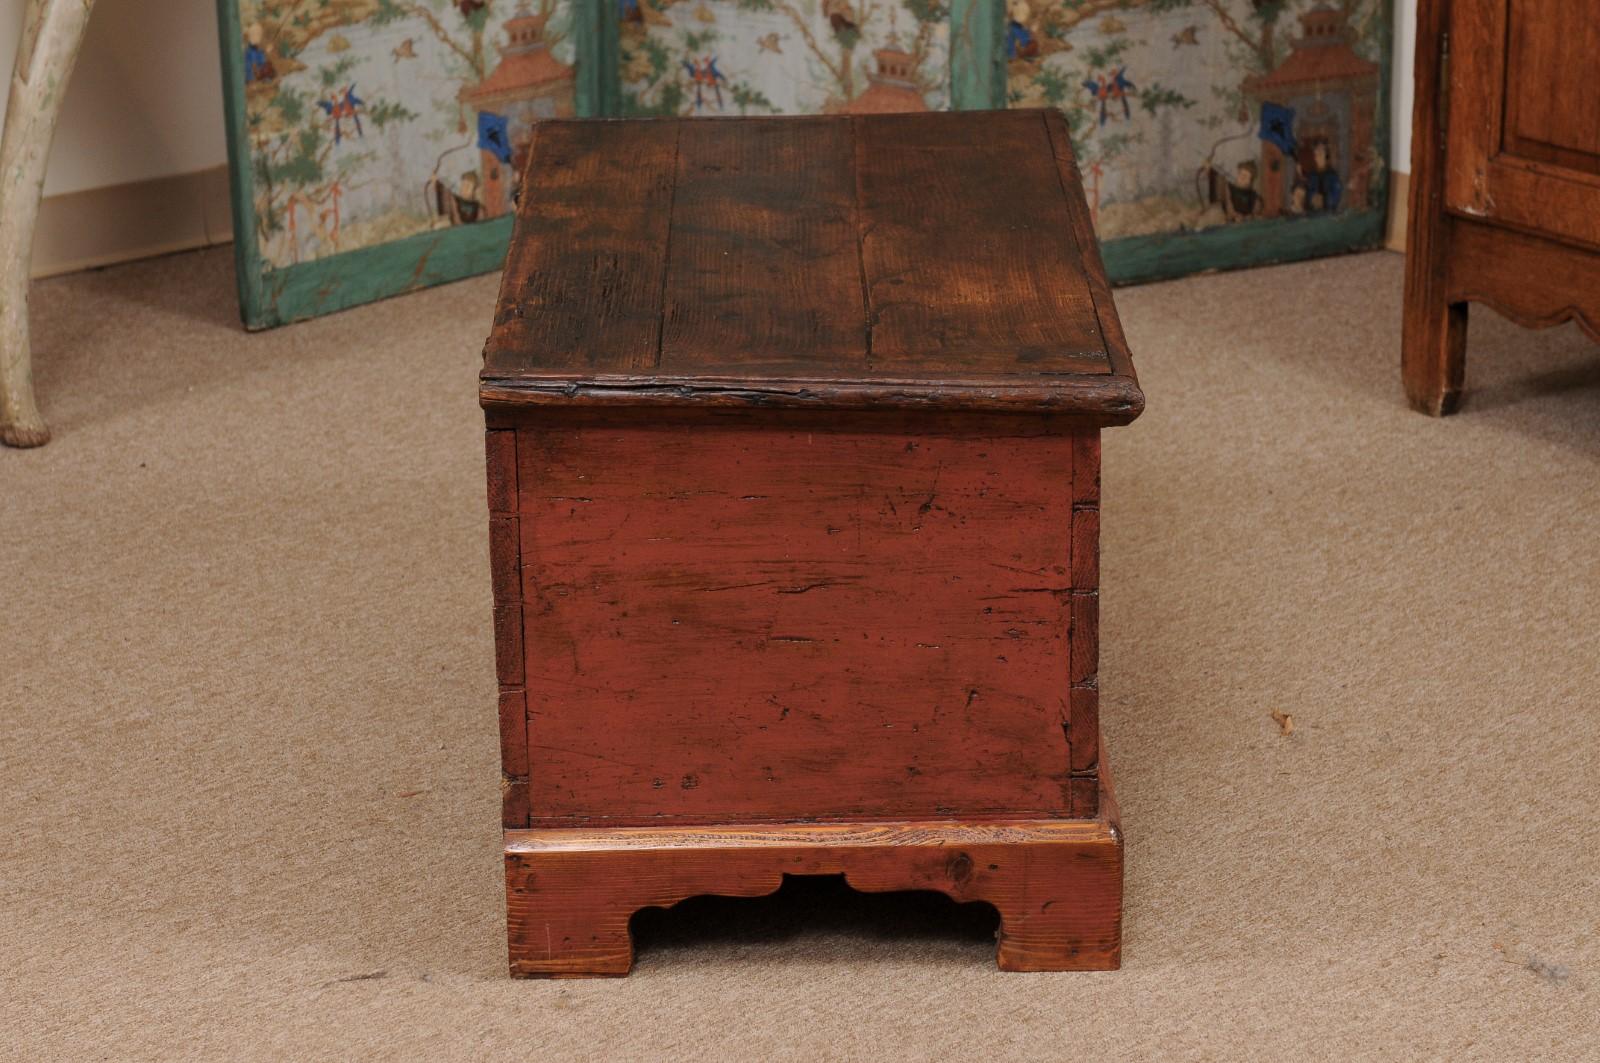  19th Century English Red Painted Pine Trunk For Sale 5